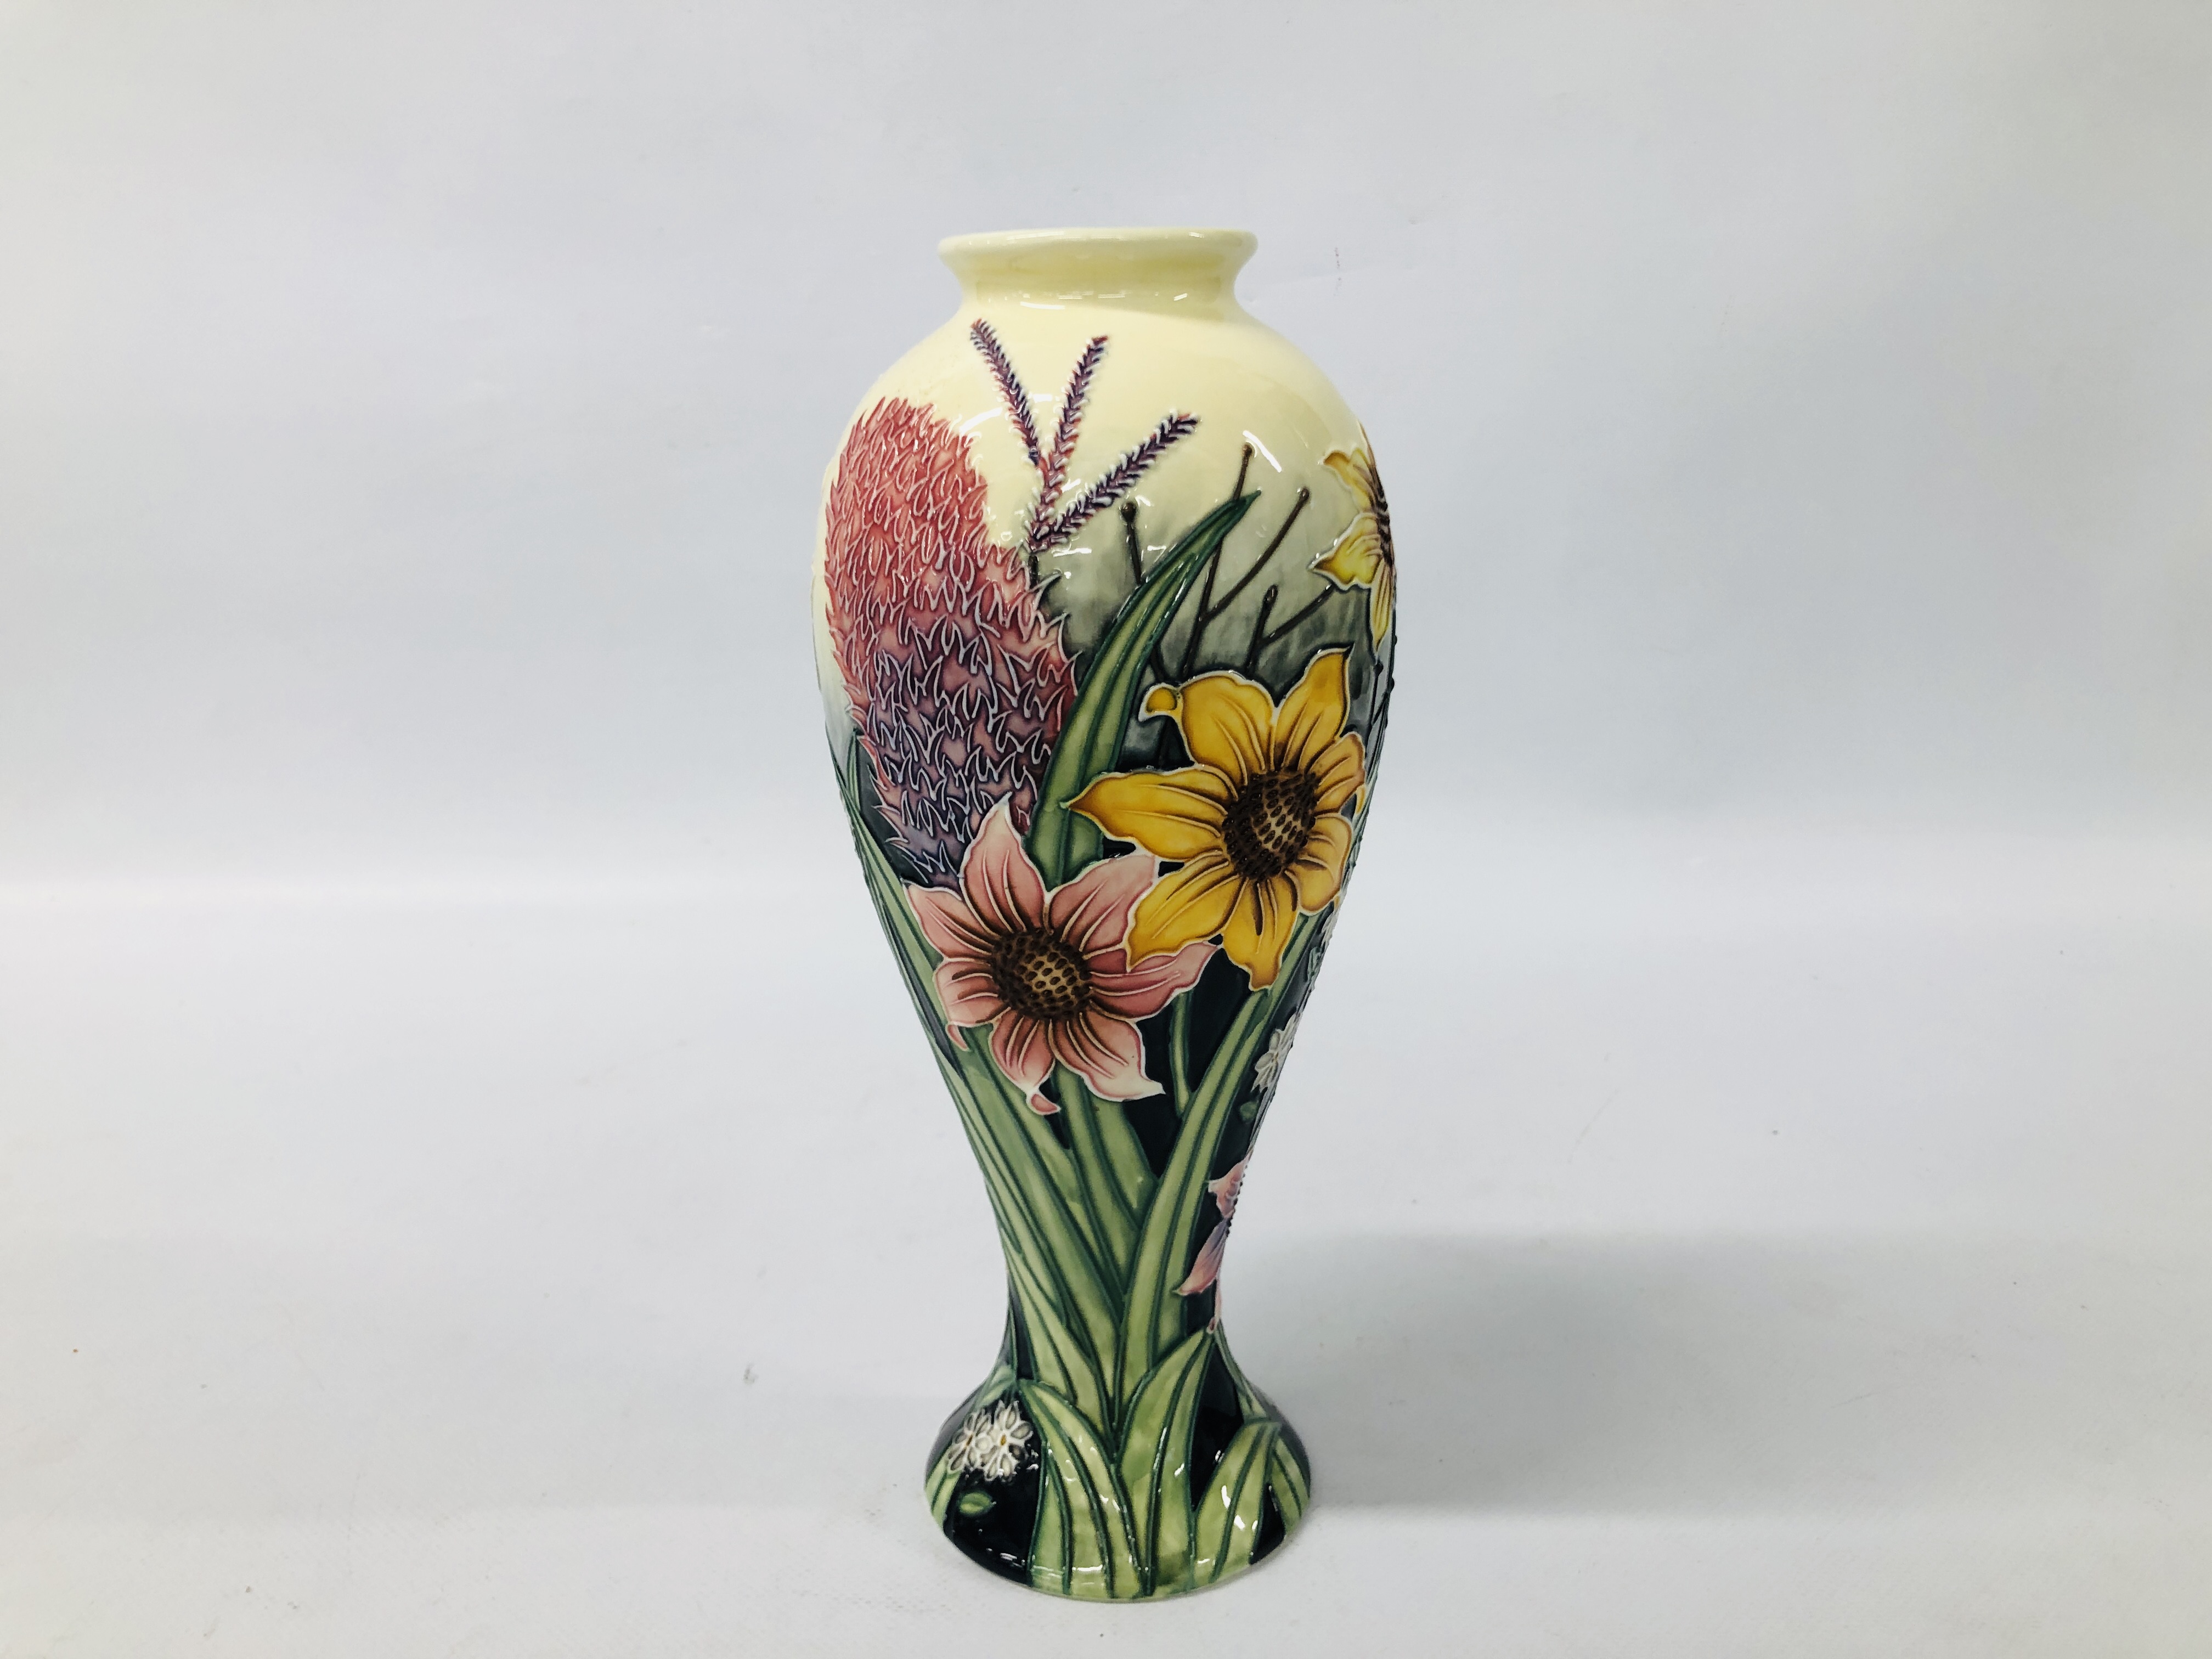 OLD TUPTON WARE HAND PAINTED FLORAL DECORATED VASE H 28CM.